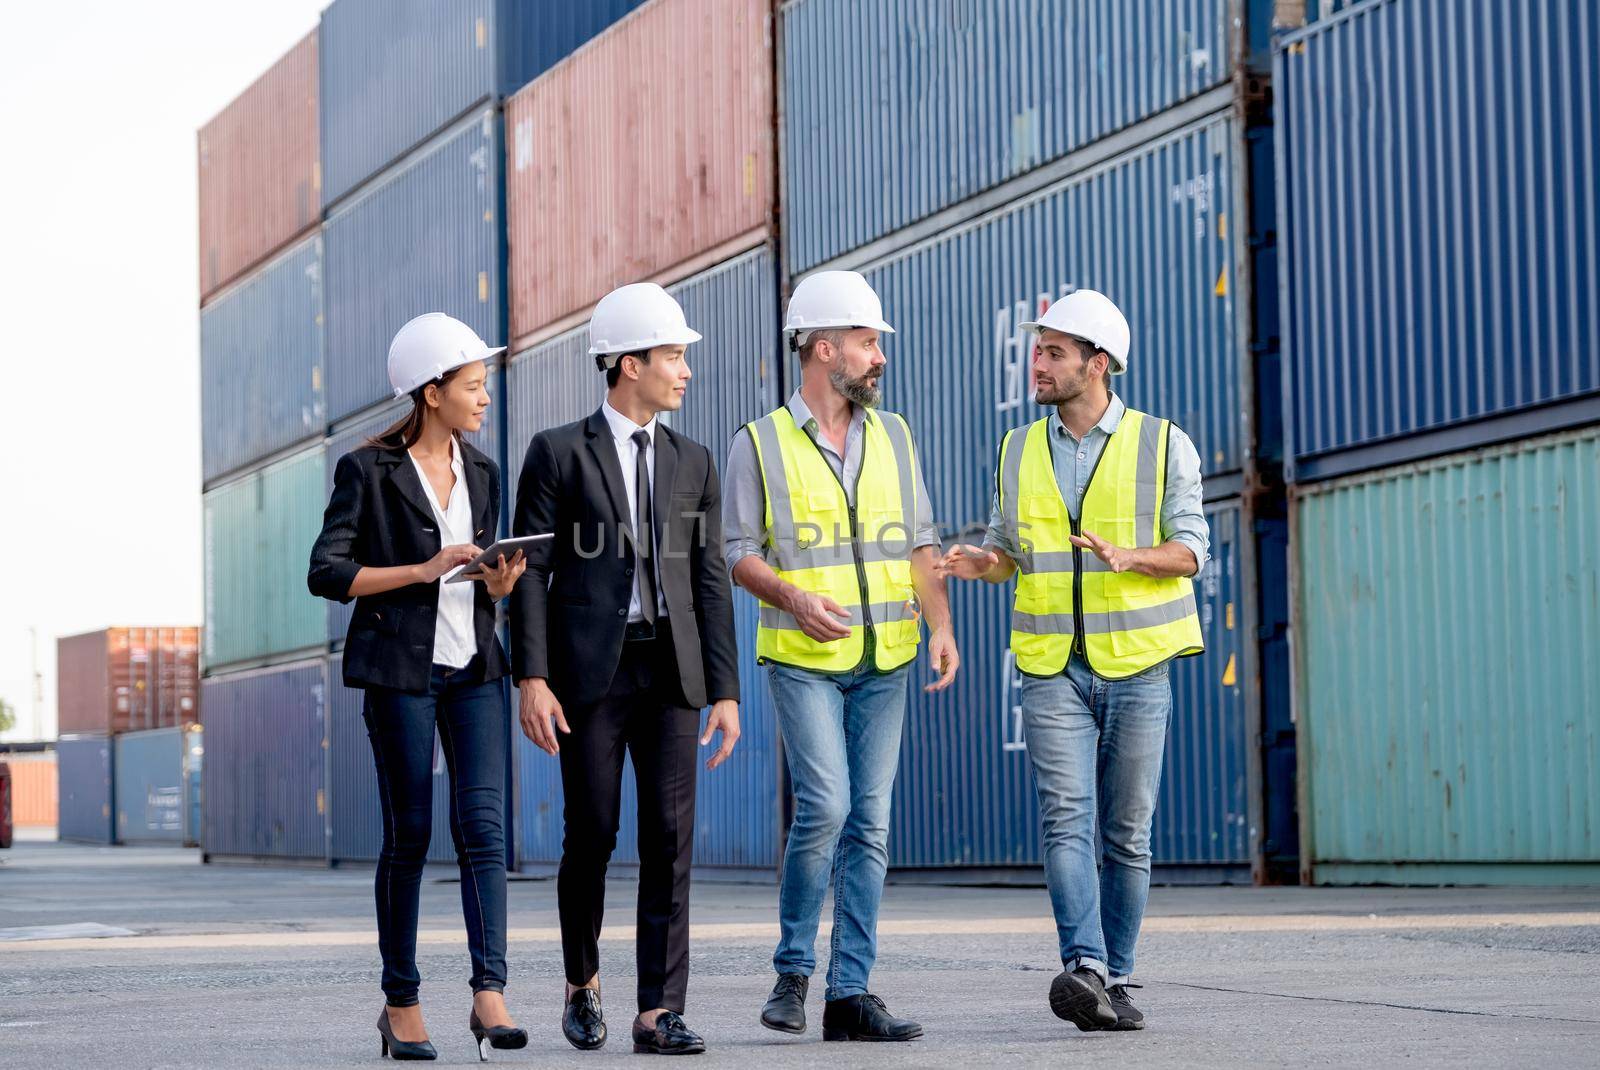 Group of cargo container workers or factory and engineer technicians walk and discuss together in workplace area. Good teamwork support best success work of industrial business concept. by nrradmin